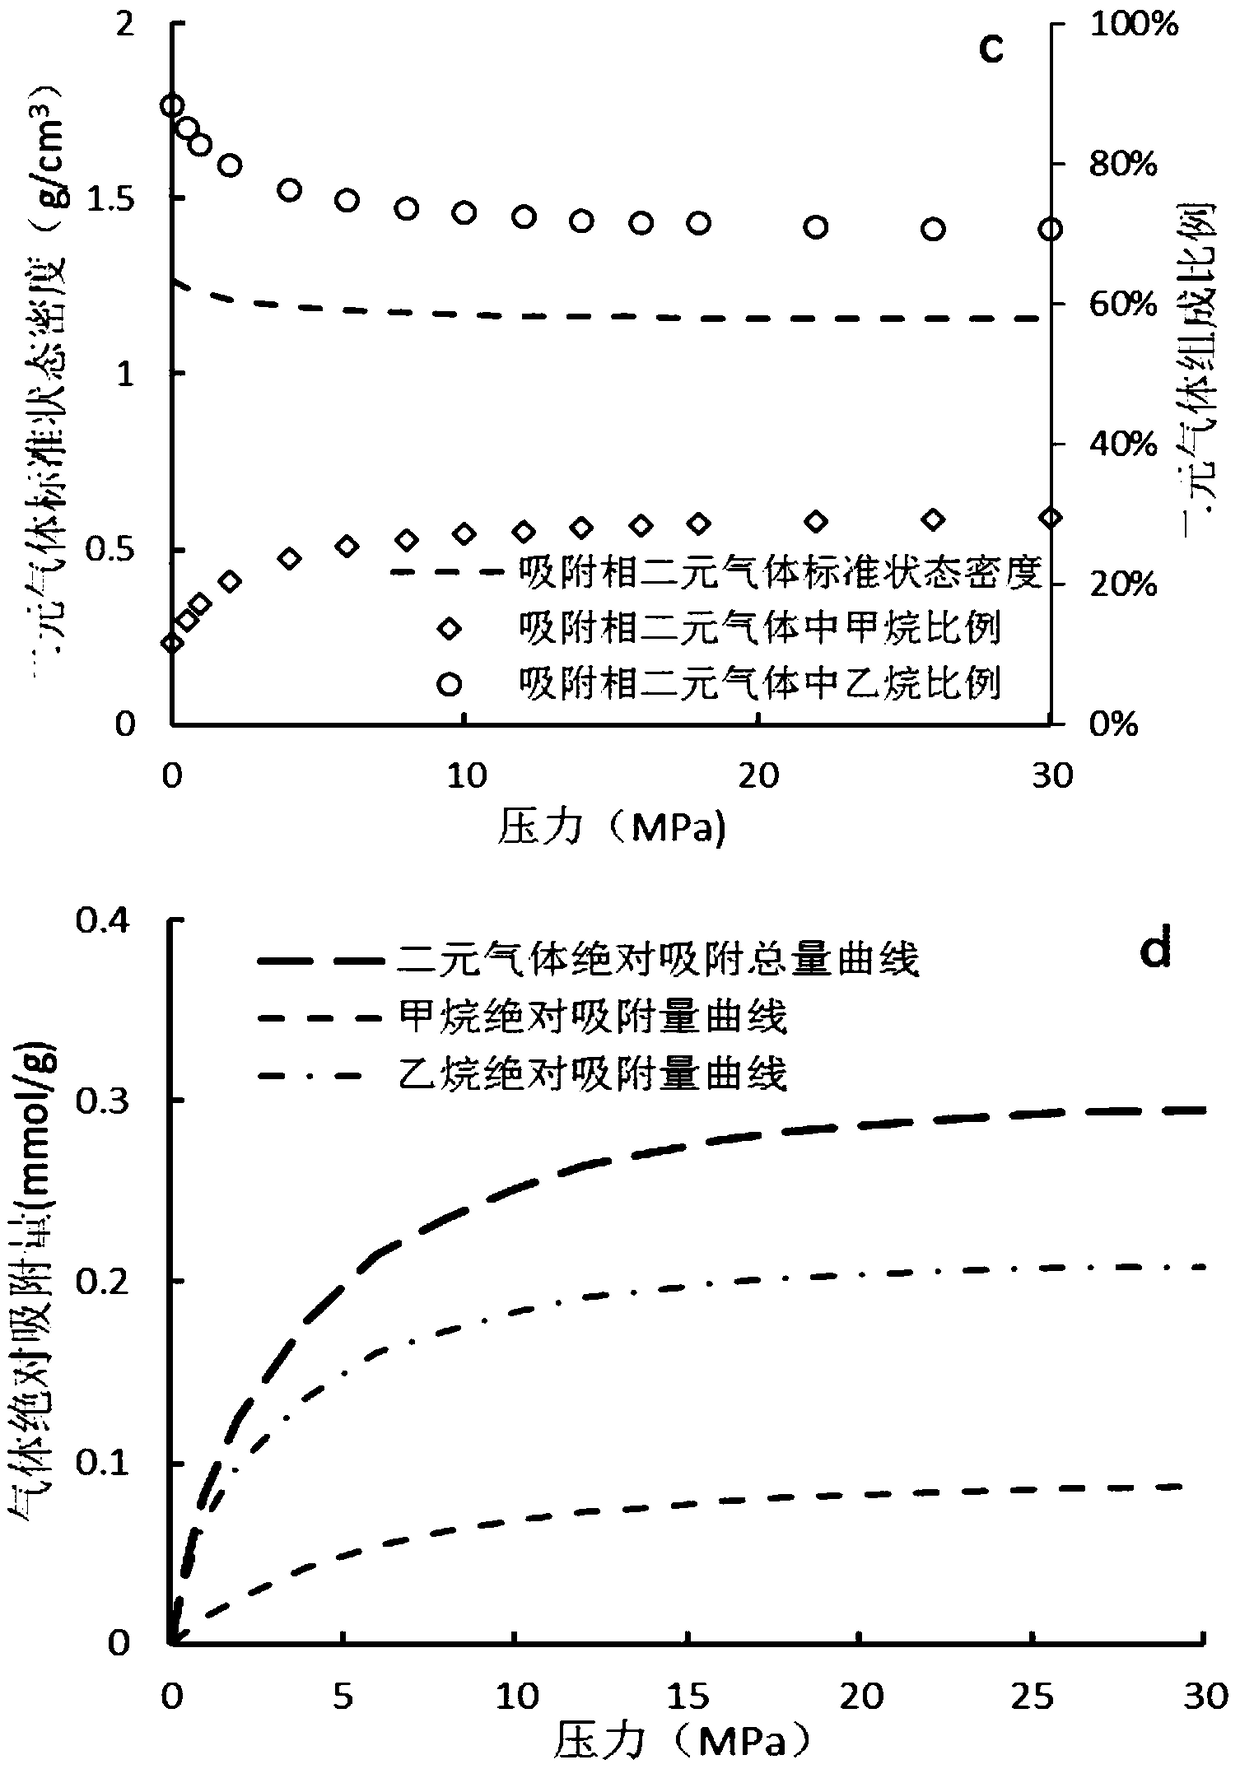 Weight method isothermal adsorption test and volumetric method isothermal adsorption test combined binary gas adsorption test method